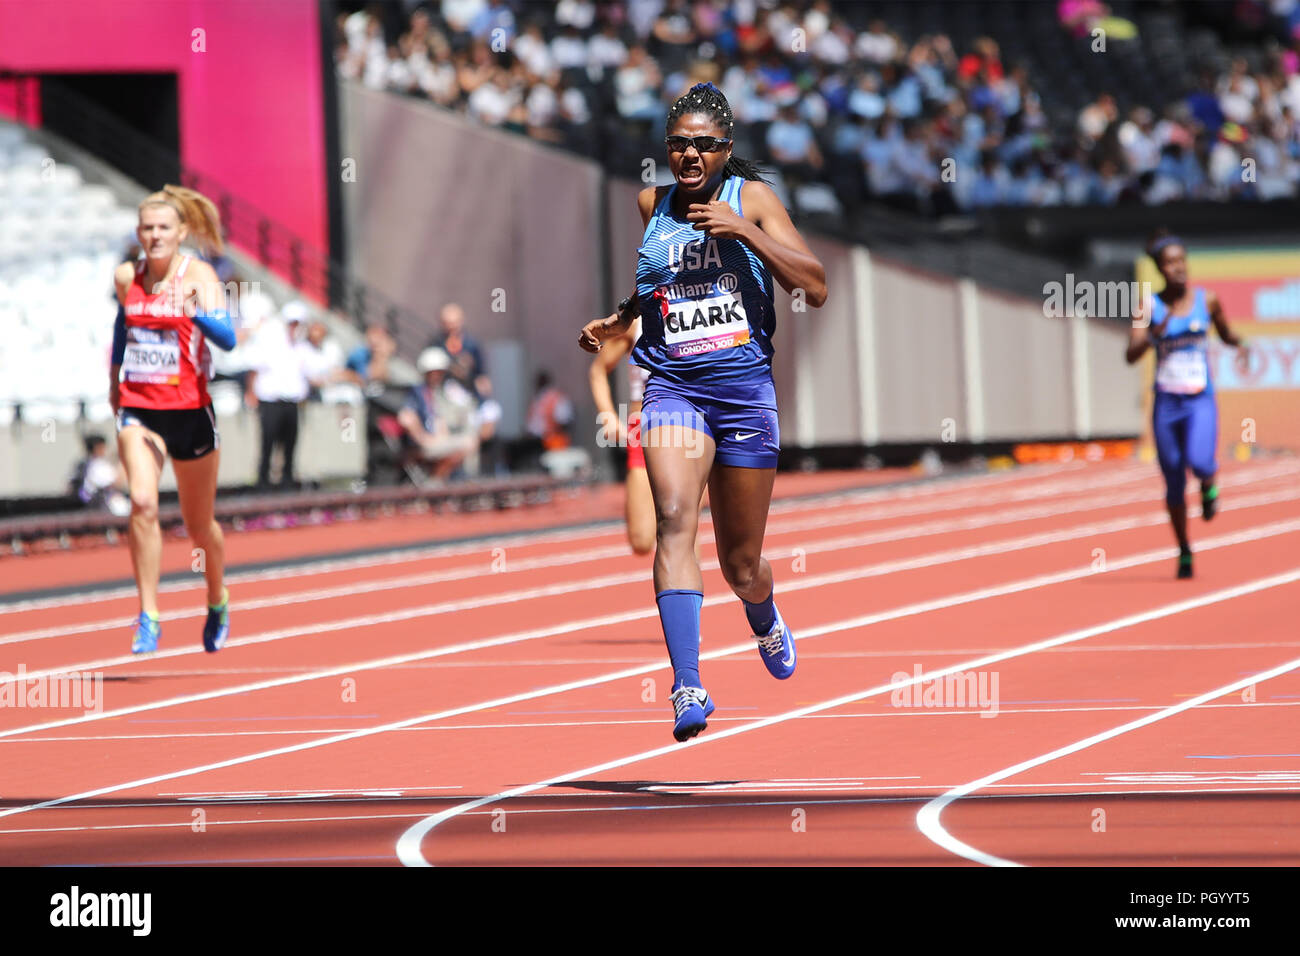 Breanna CLARK of the USA in the Women's 400m T20 heats at the World Para Championships in London 2017 Stock Photo